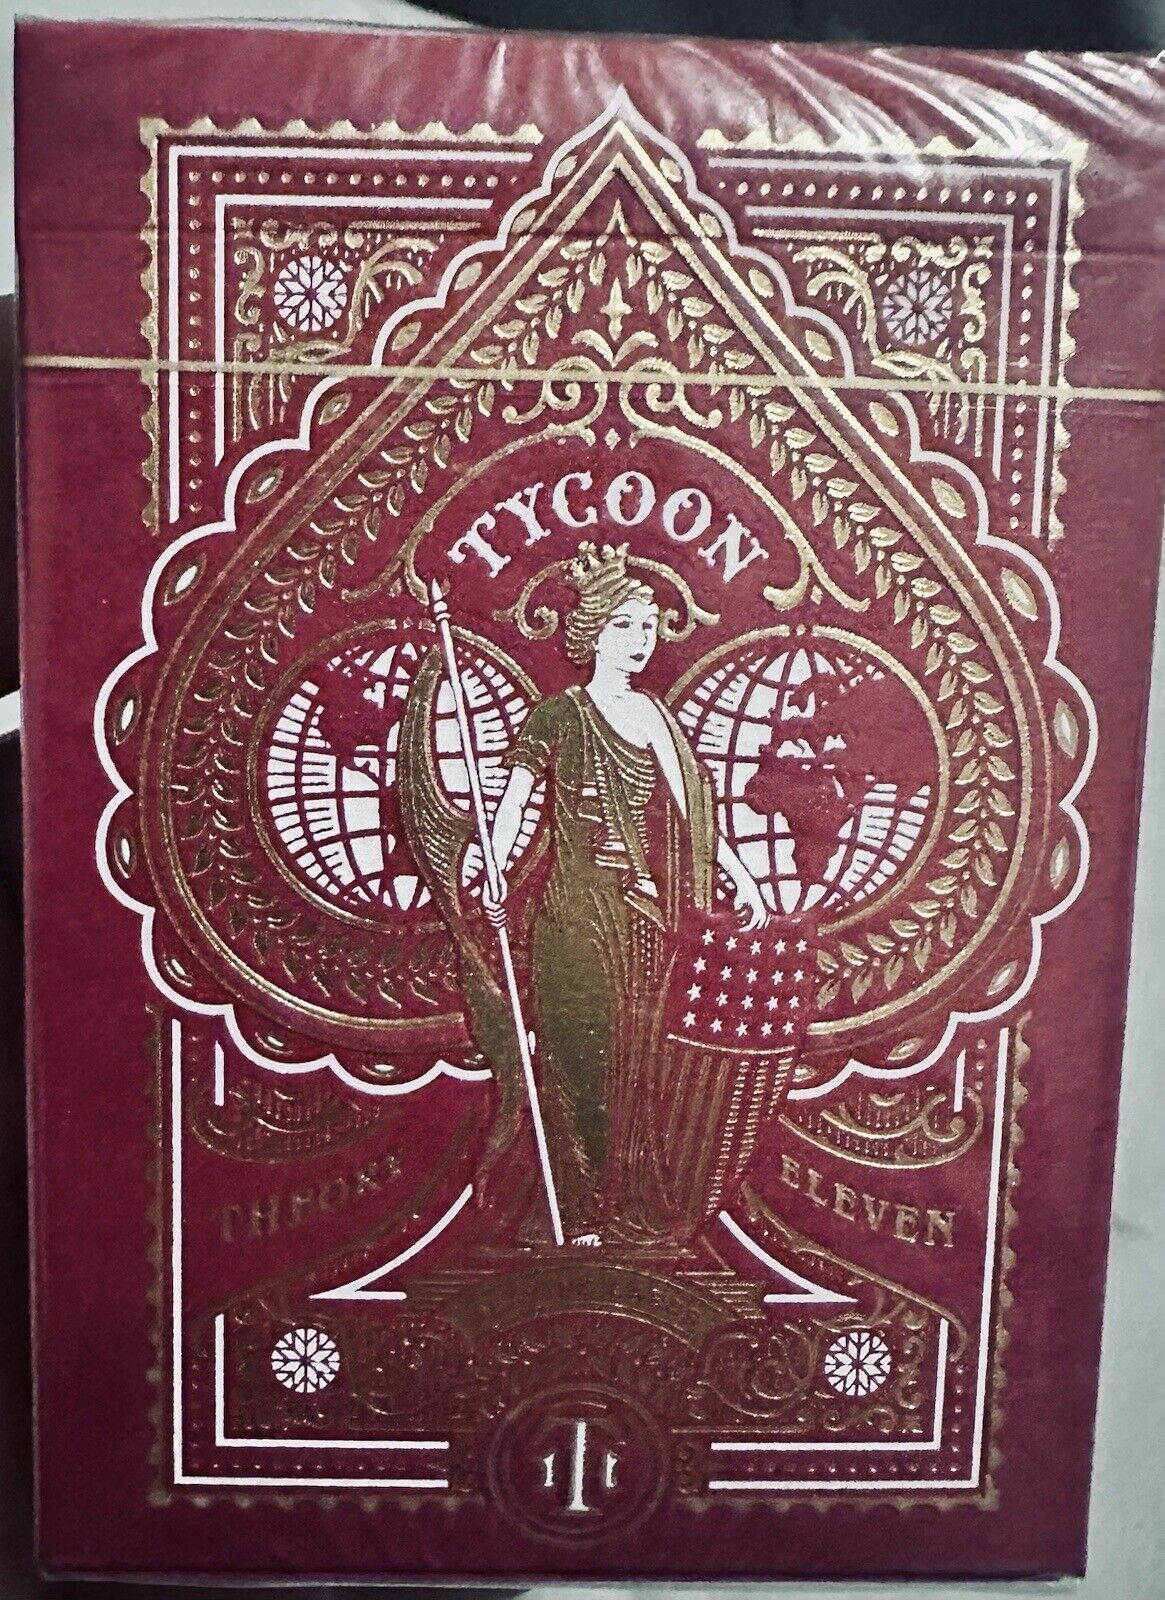 theory11 Tycoon Playing Cards (Red)